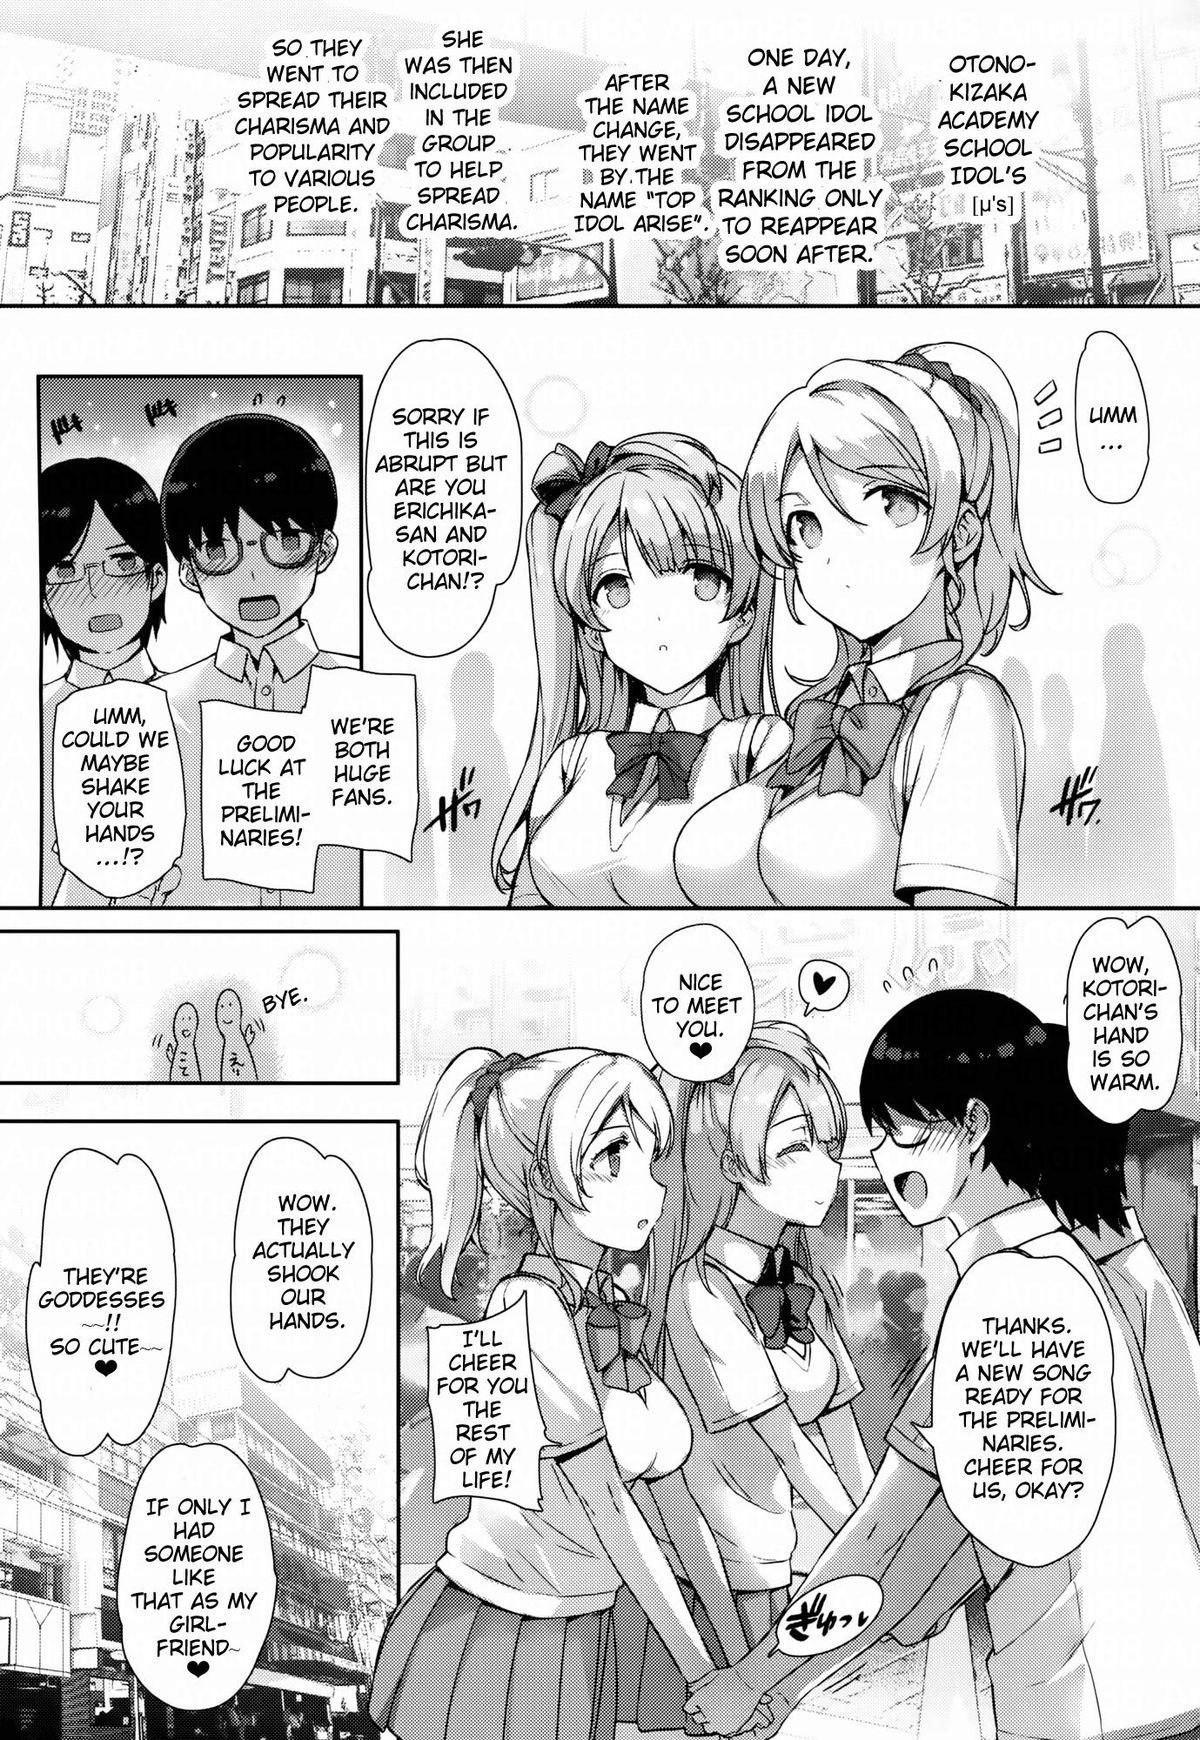 Spanish SEX p.a.r.t.y - Love live Sis - Page 2